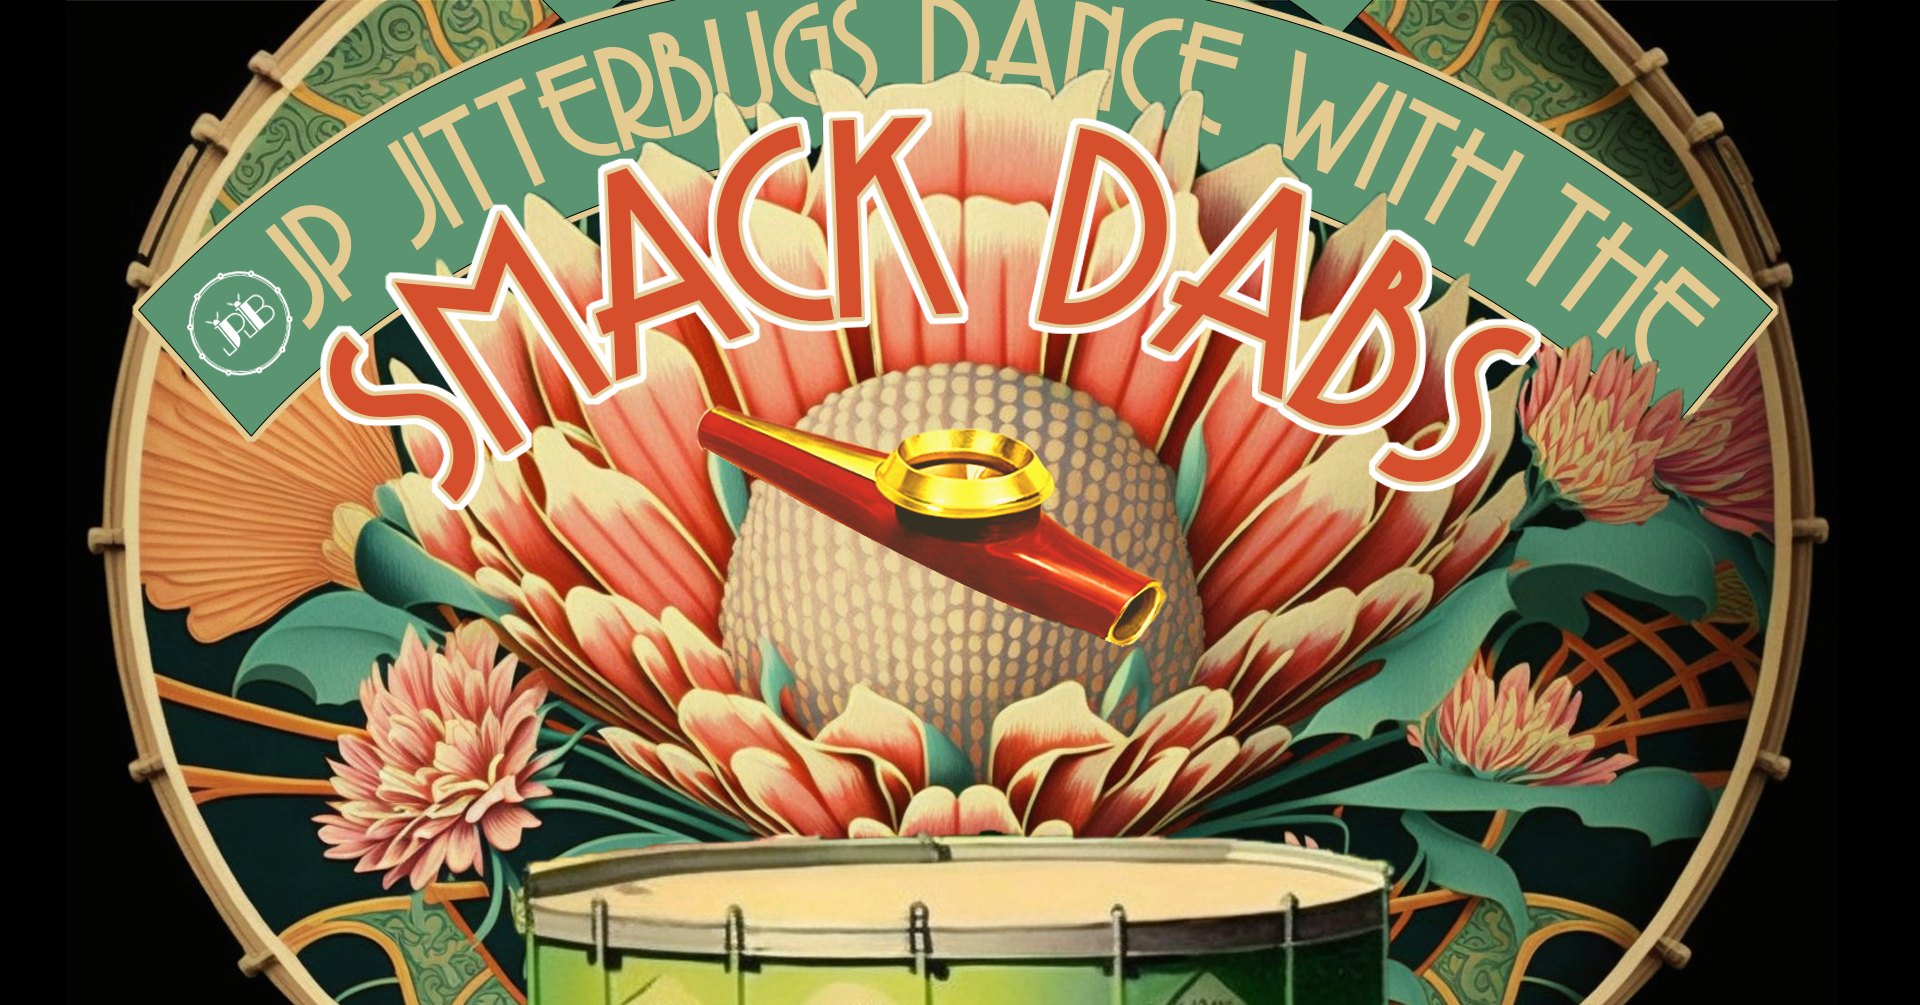 Colorful illustration of a kazoo and a drum with floral background and"JP Jitterbugs dance with the Smack Dabs" written at the top.